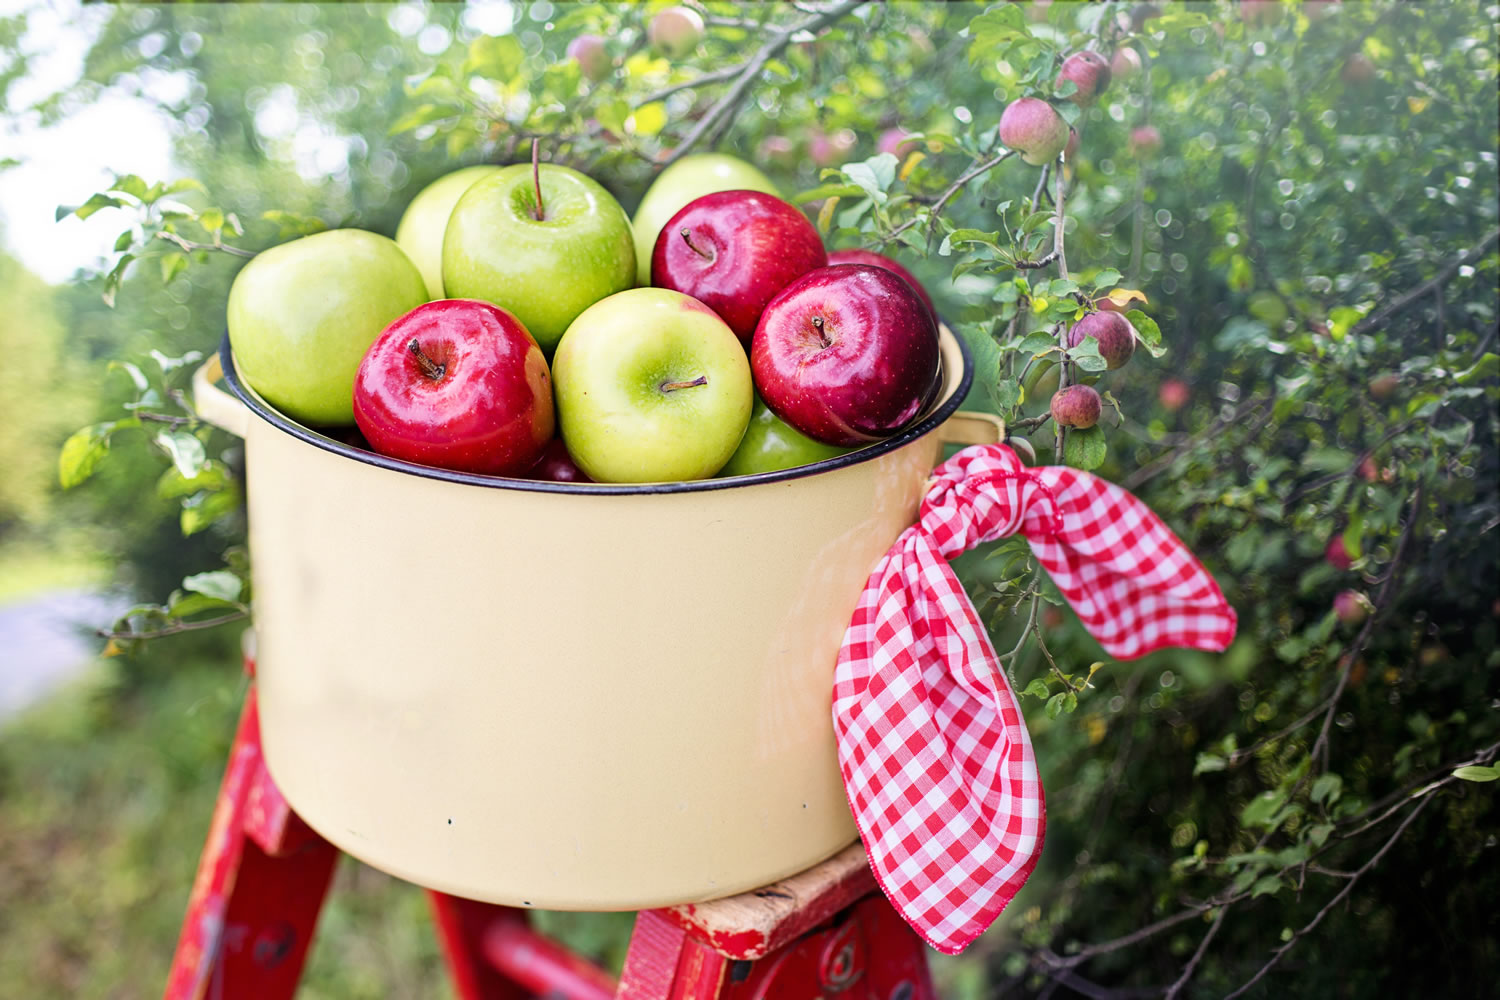  Red And Green Apples Wallpaper Mural      